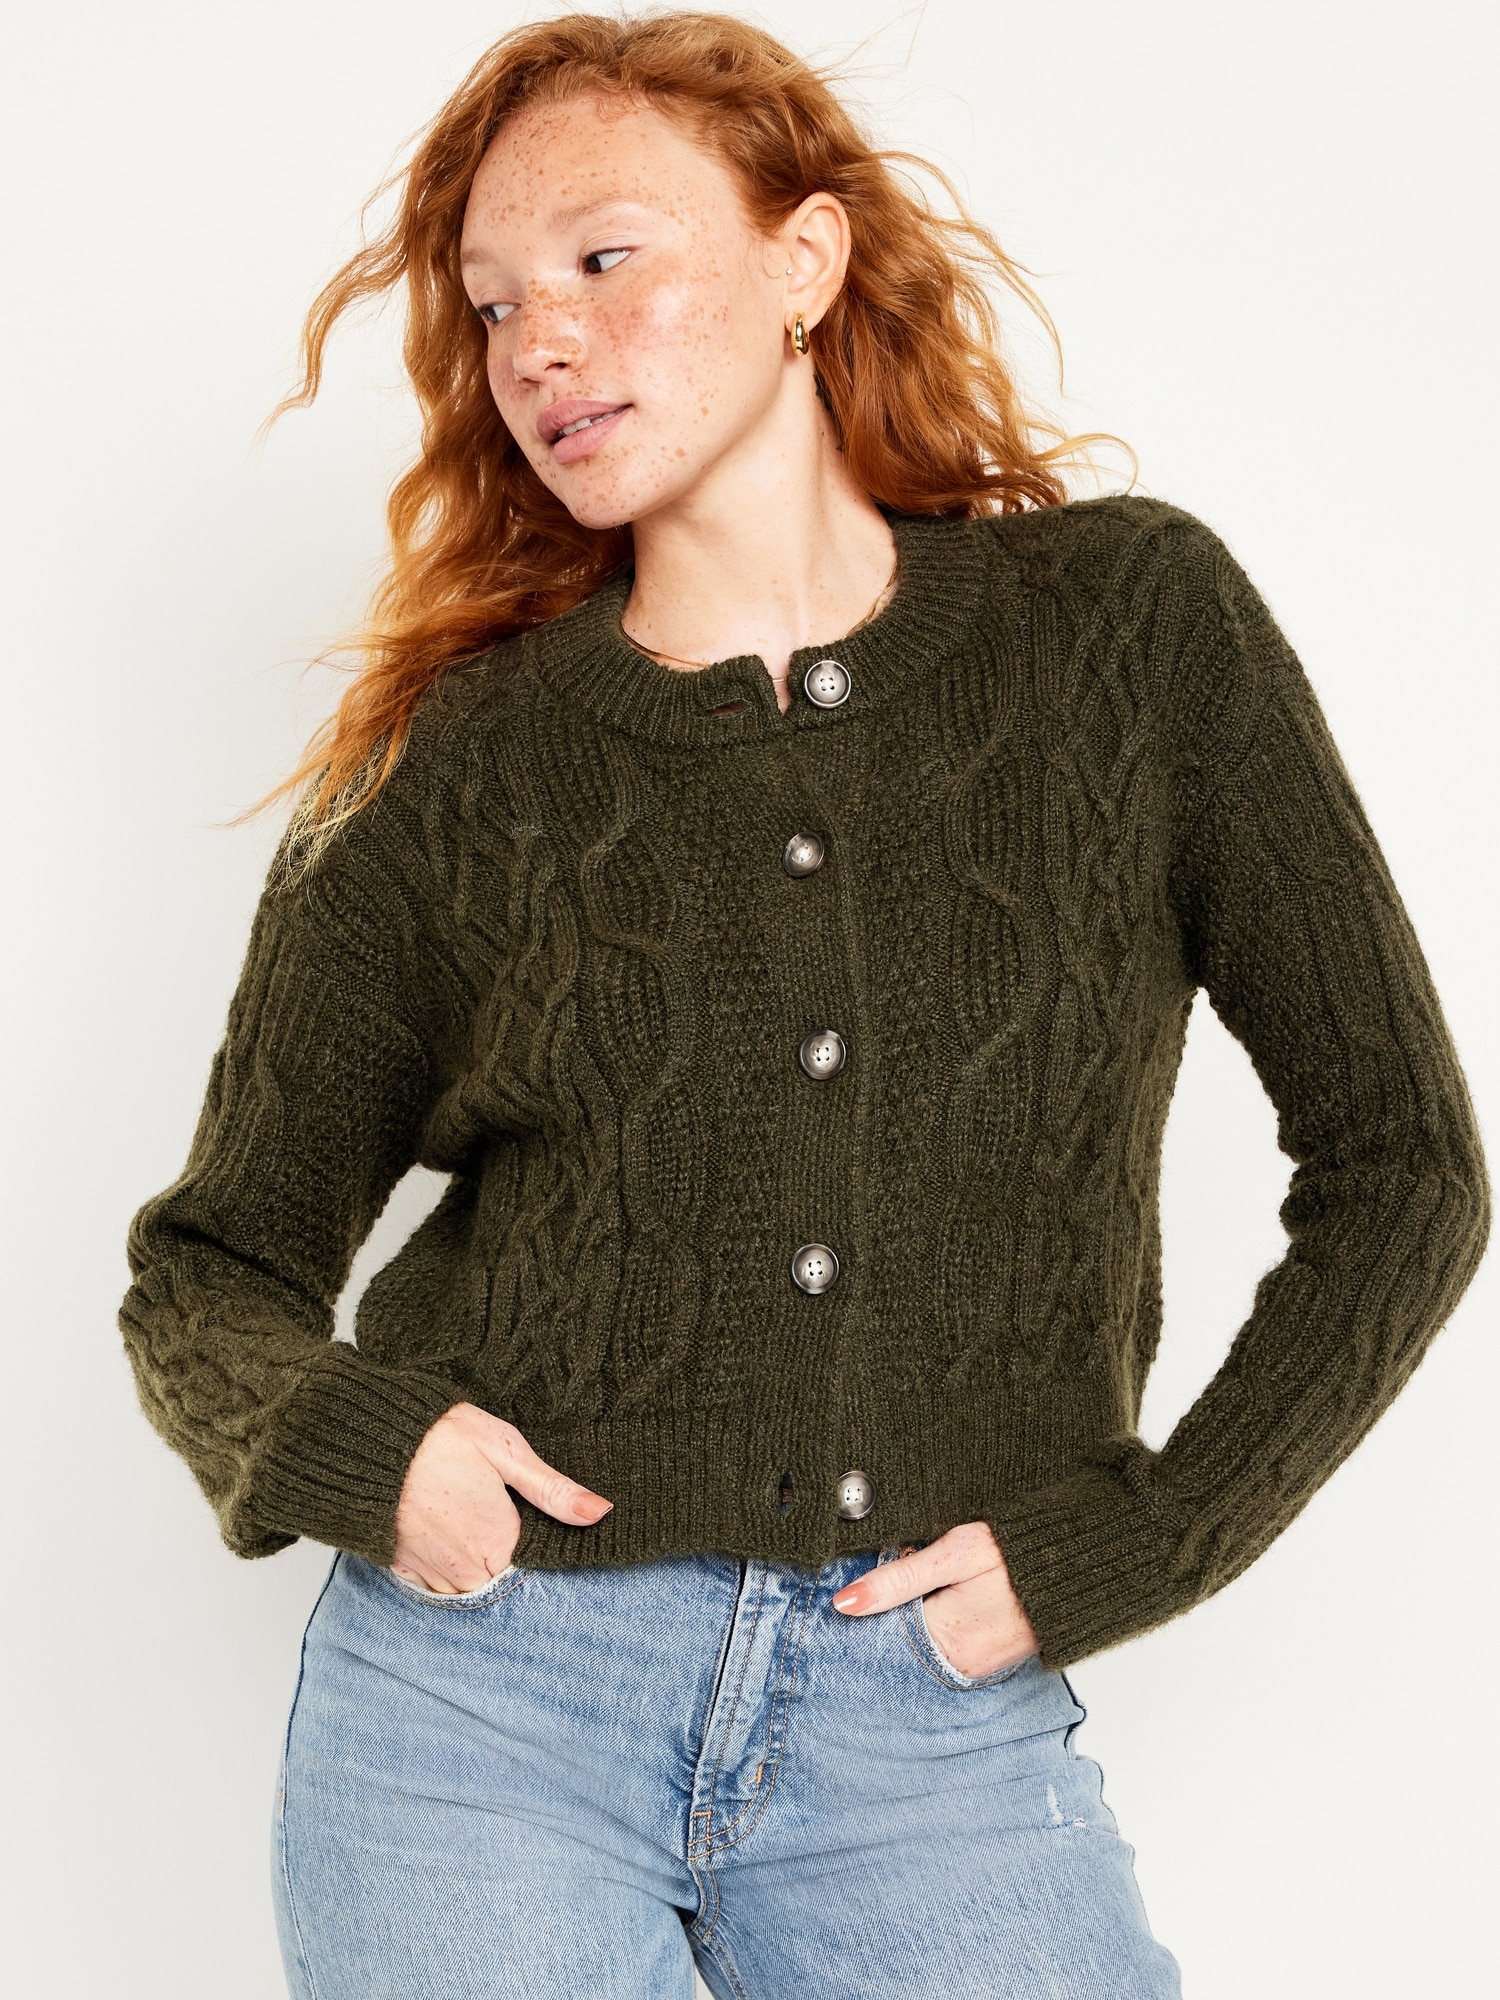 Cable-Knit Cardigan Sweater